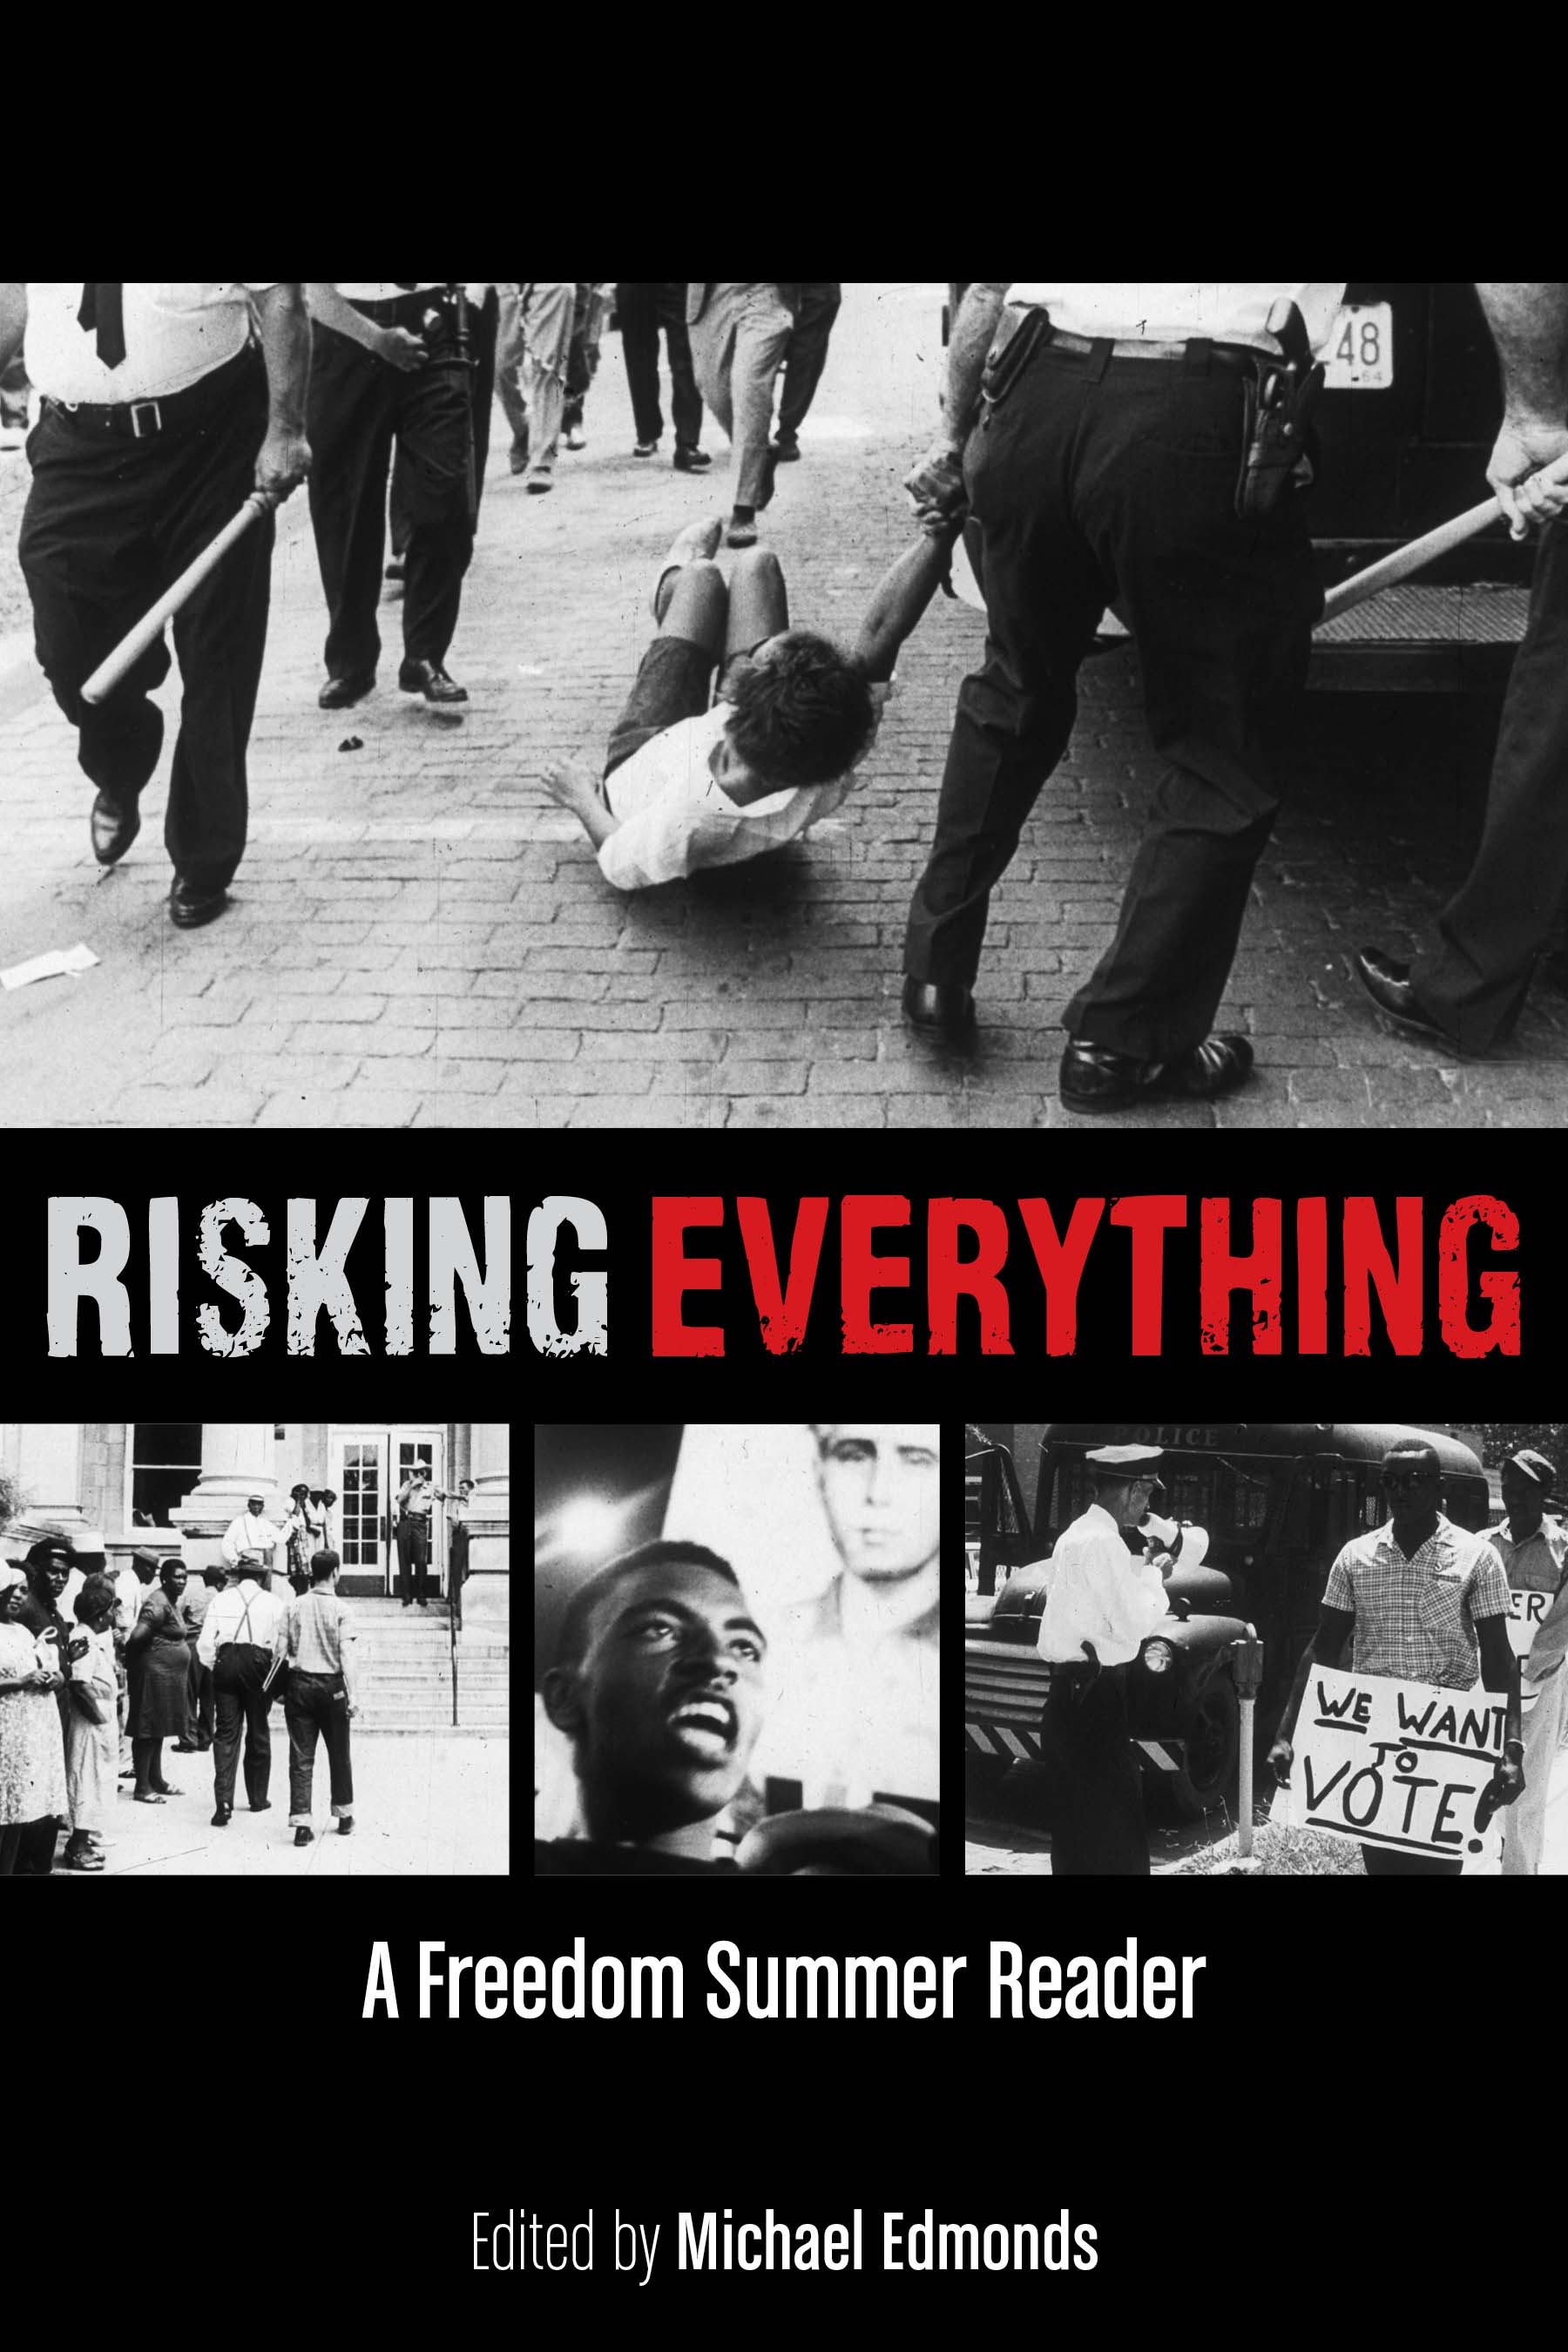 Risking. Risk everything. Freedom Summer. Everything is a lot